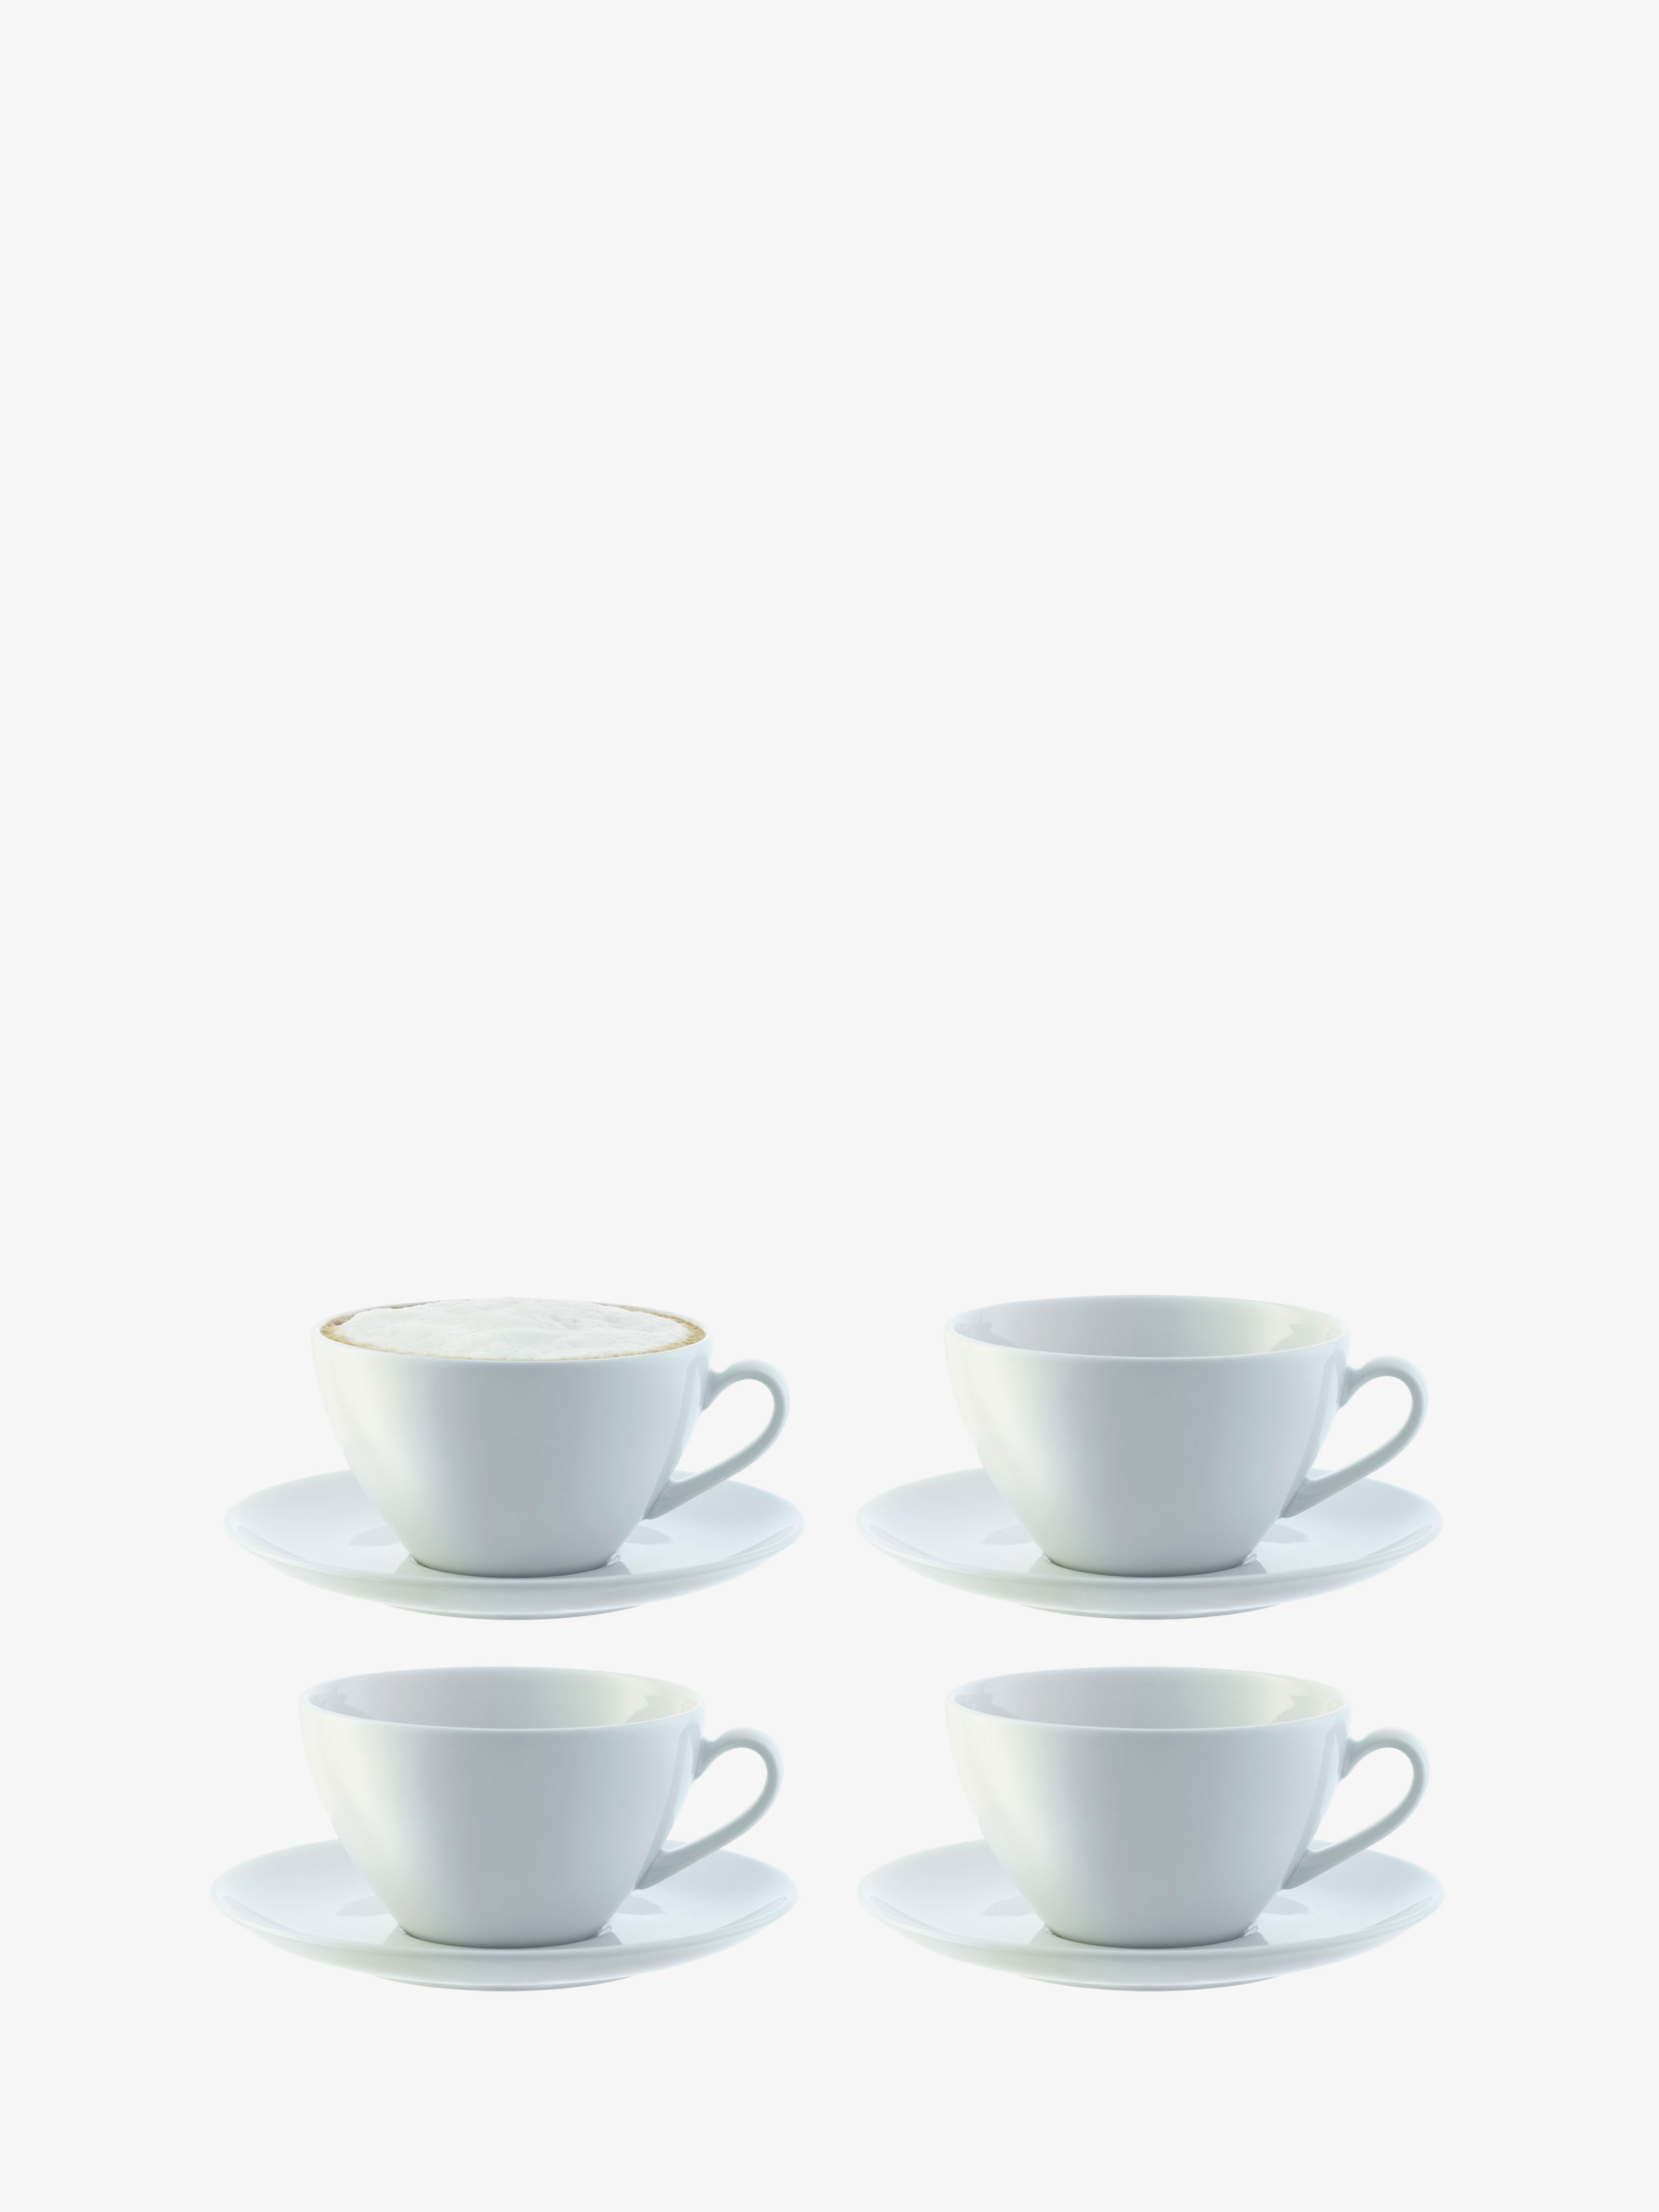 LSA International Dine Cappuccino Cup and Saucer (Set of 4) 350ml 